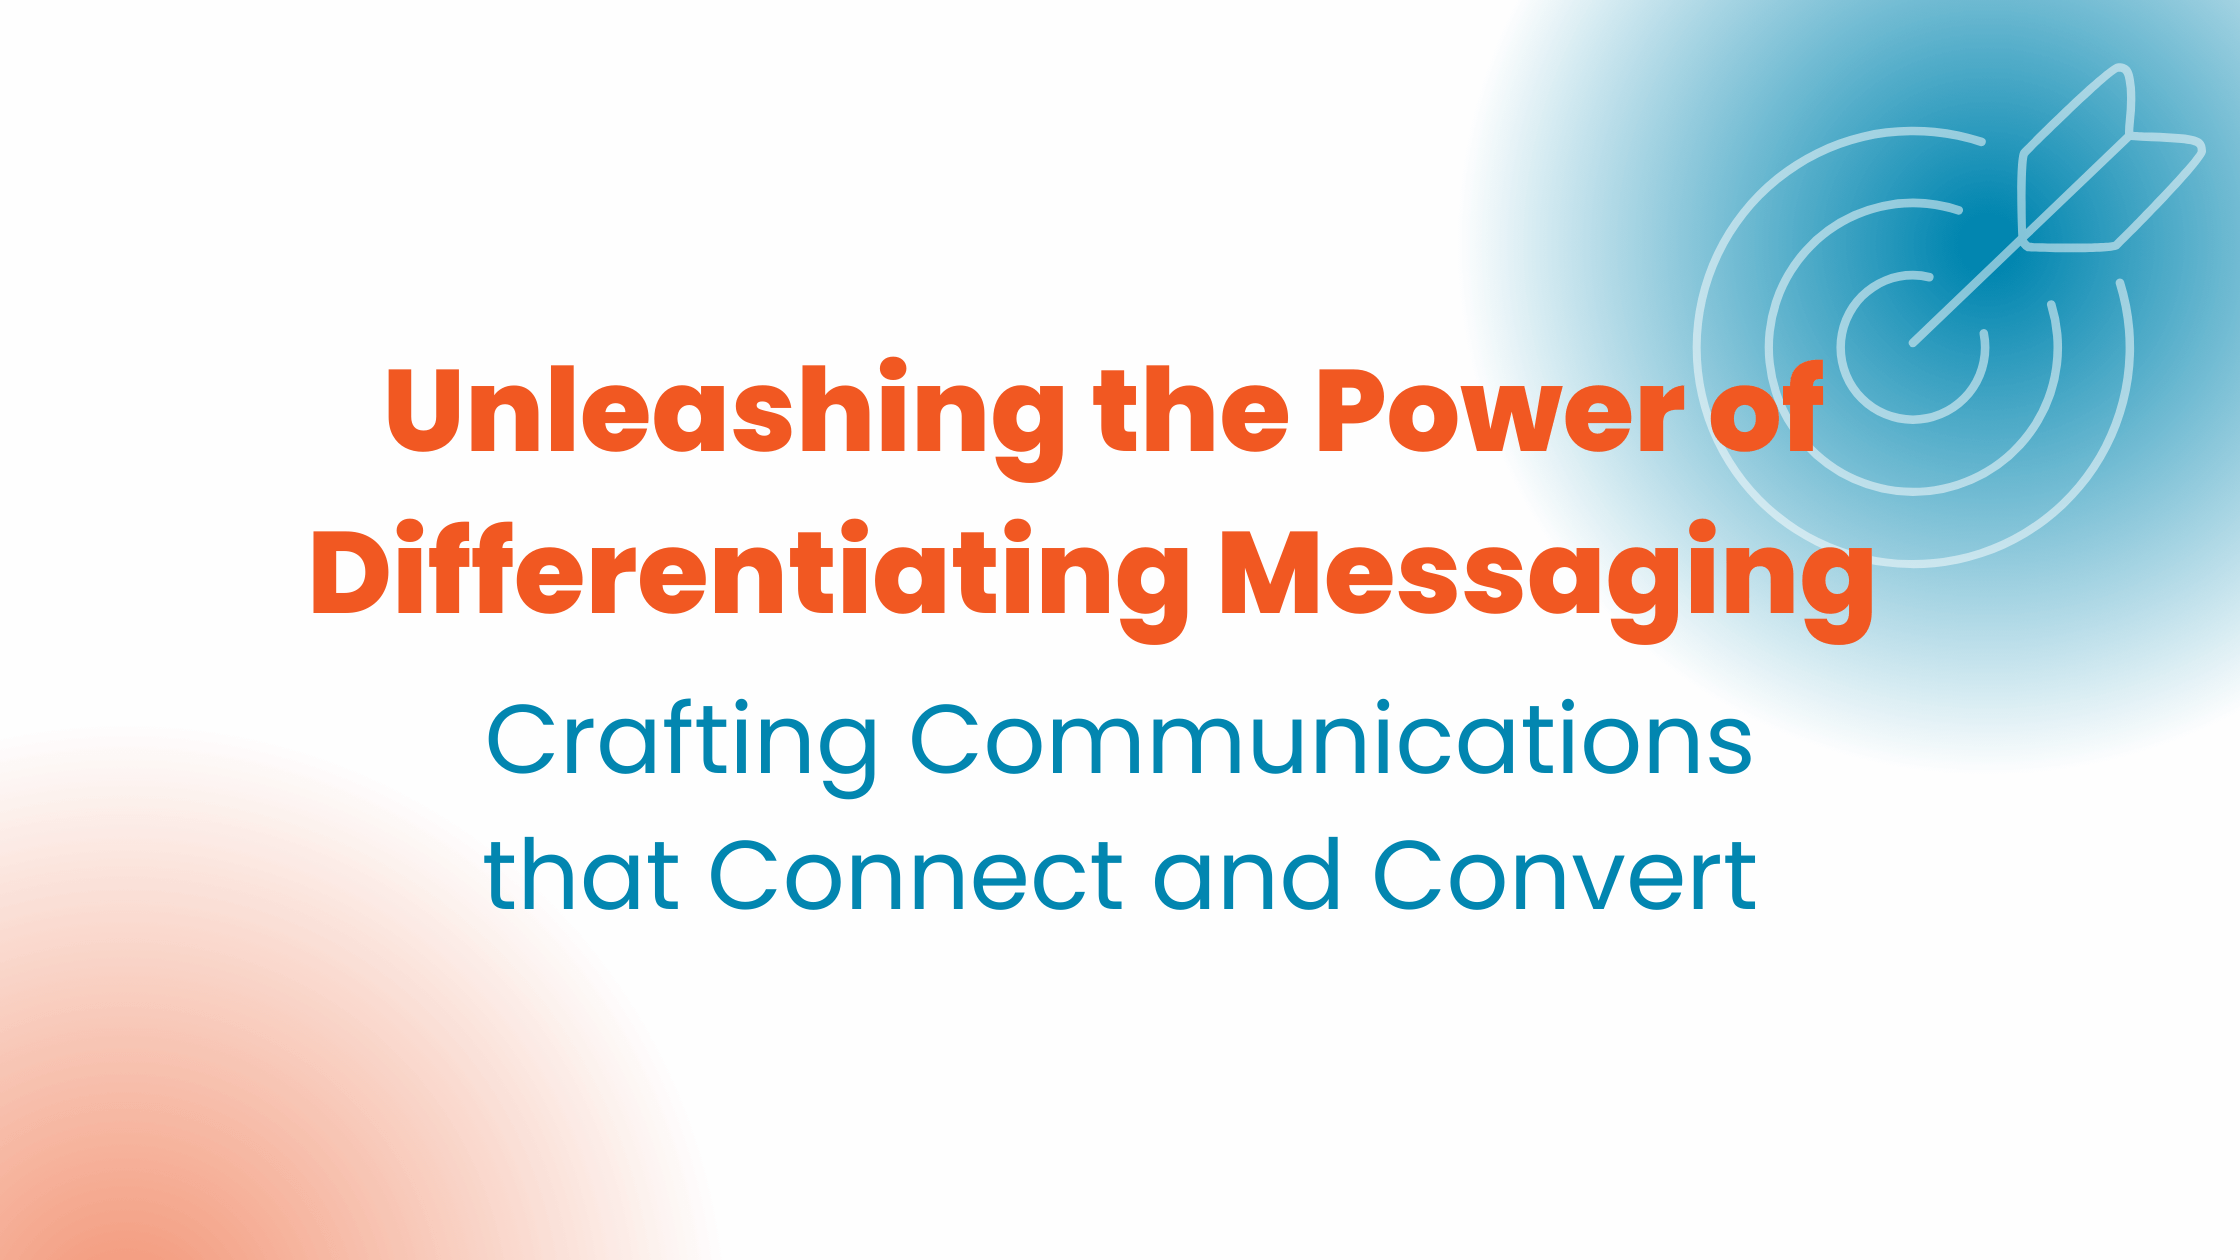 Unleashing the Power of Differentiating Messaging